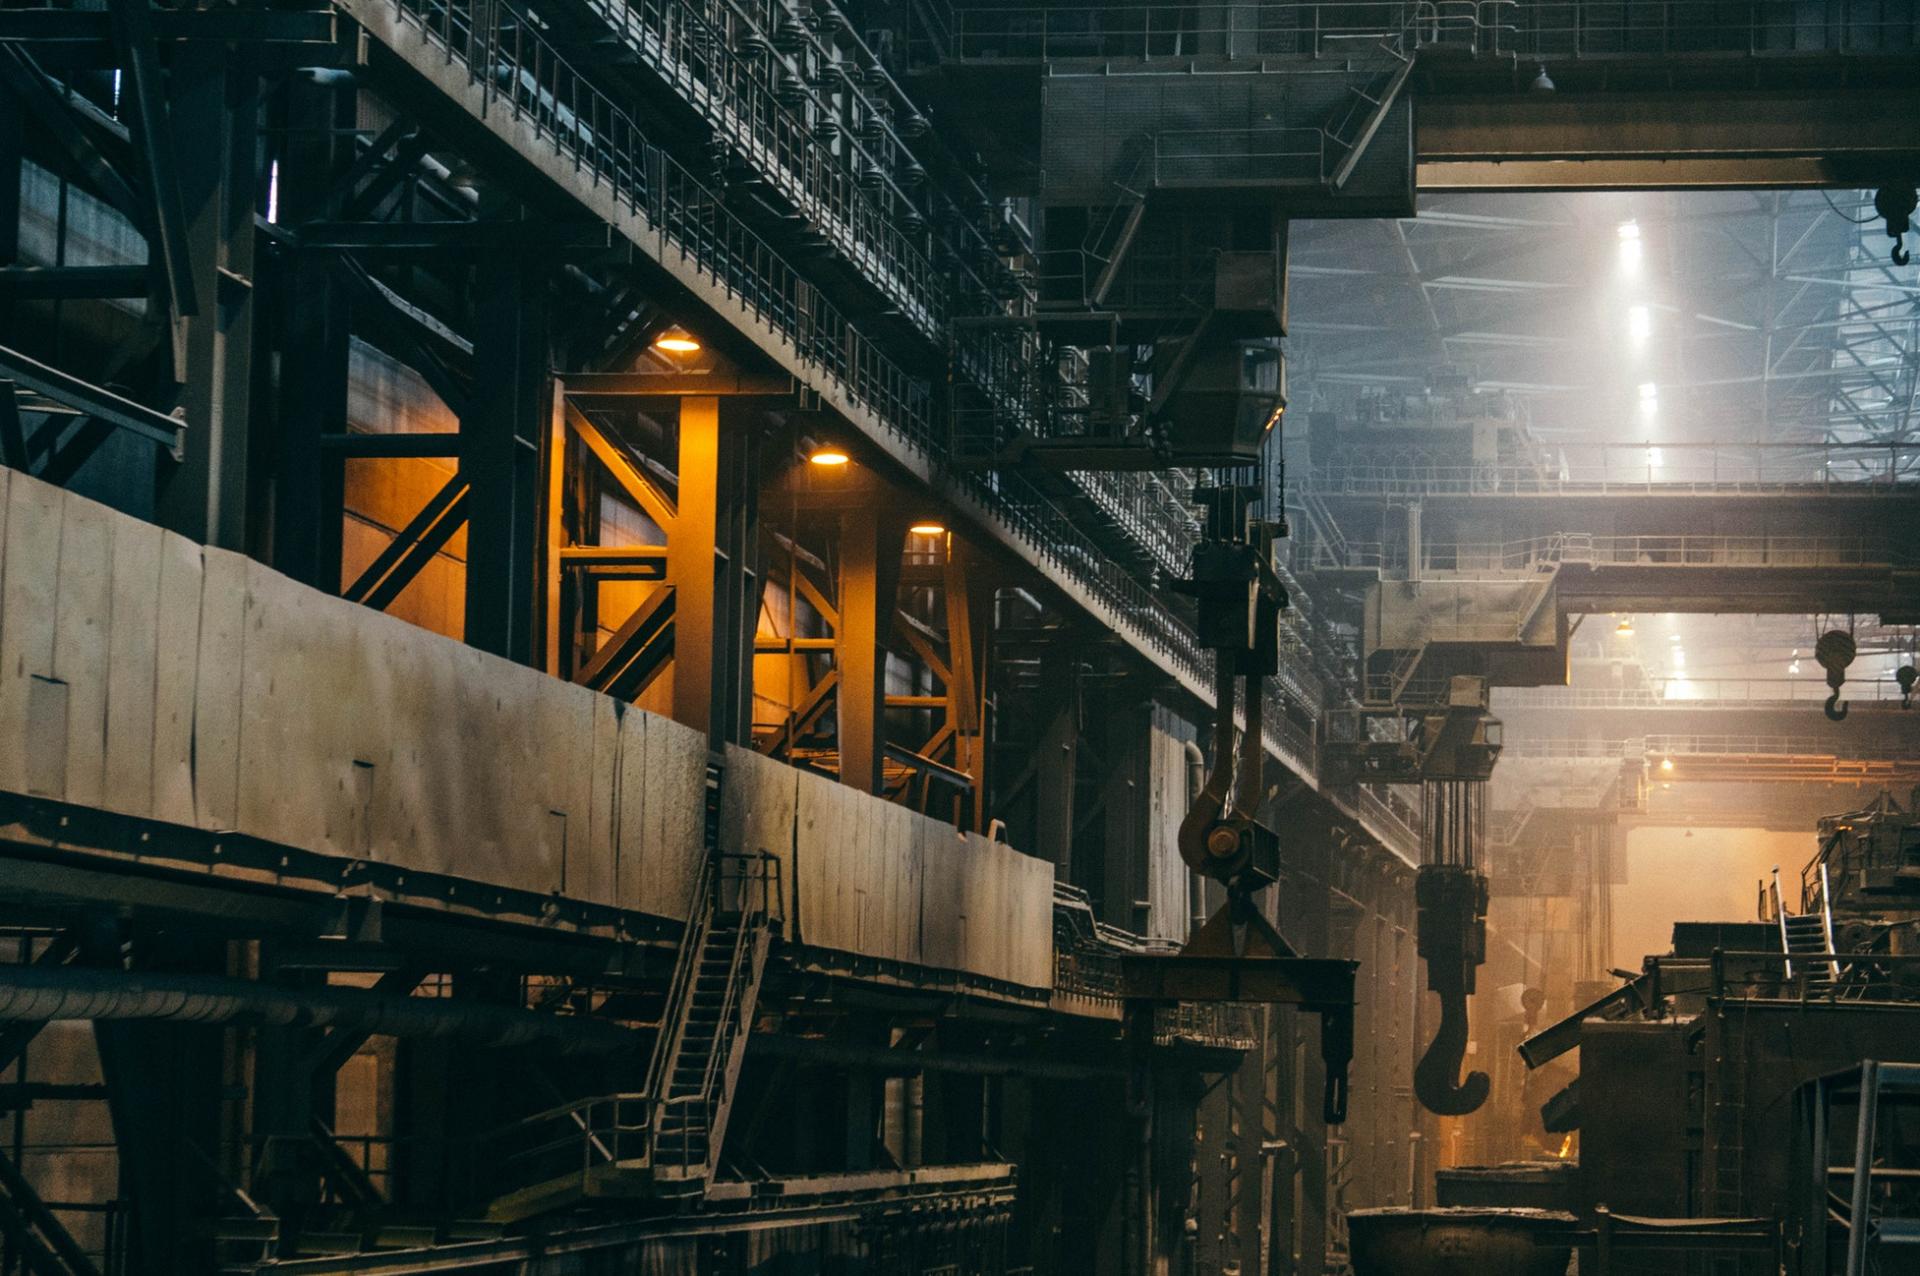 Suppliers expected to follow British Steel into insolvency